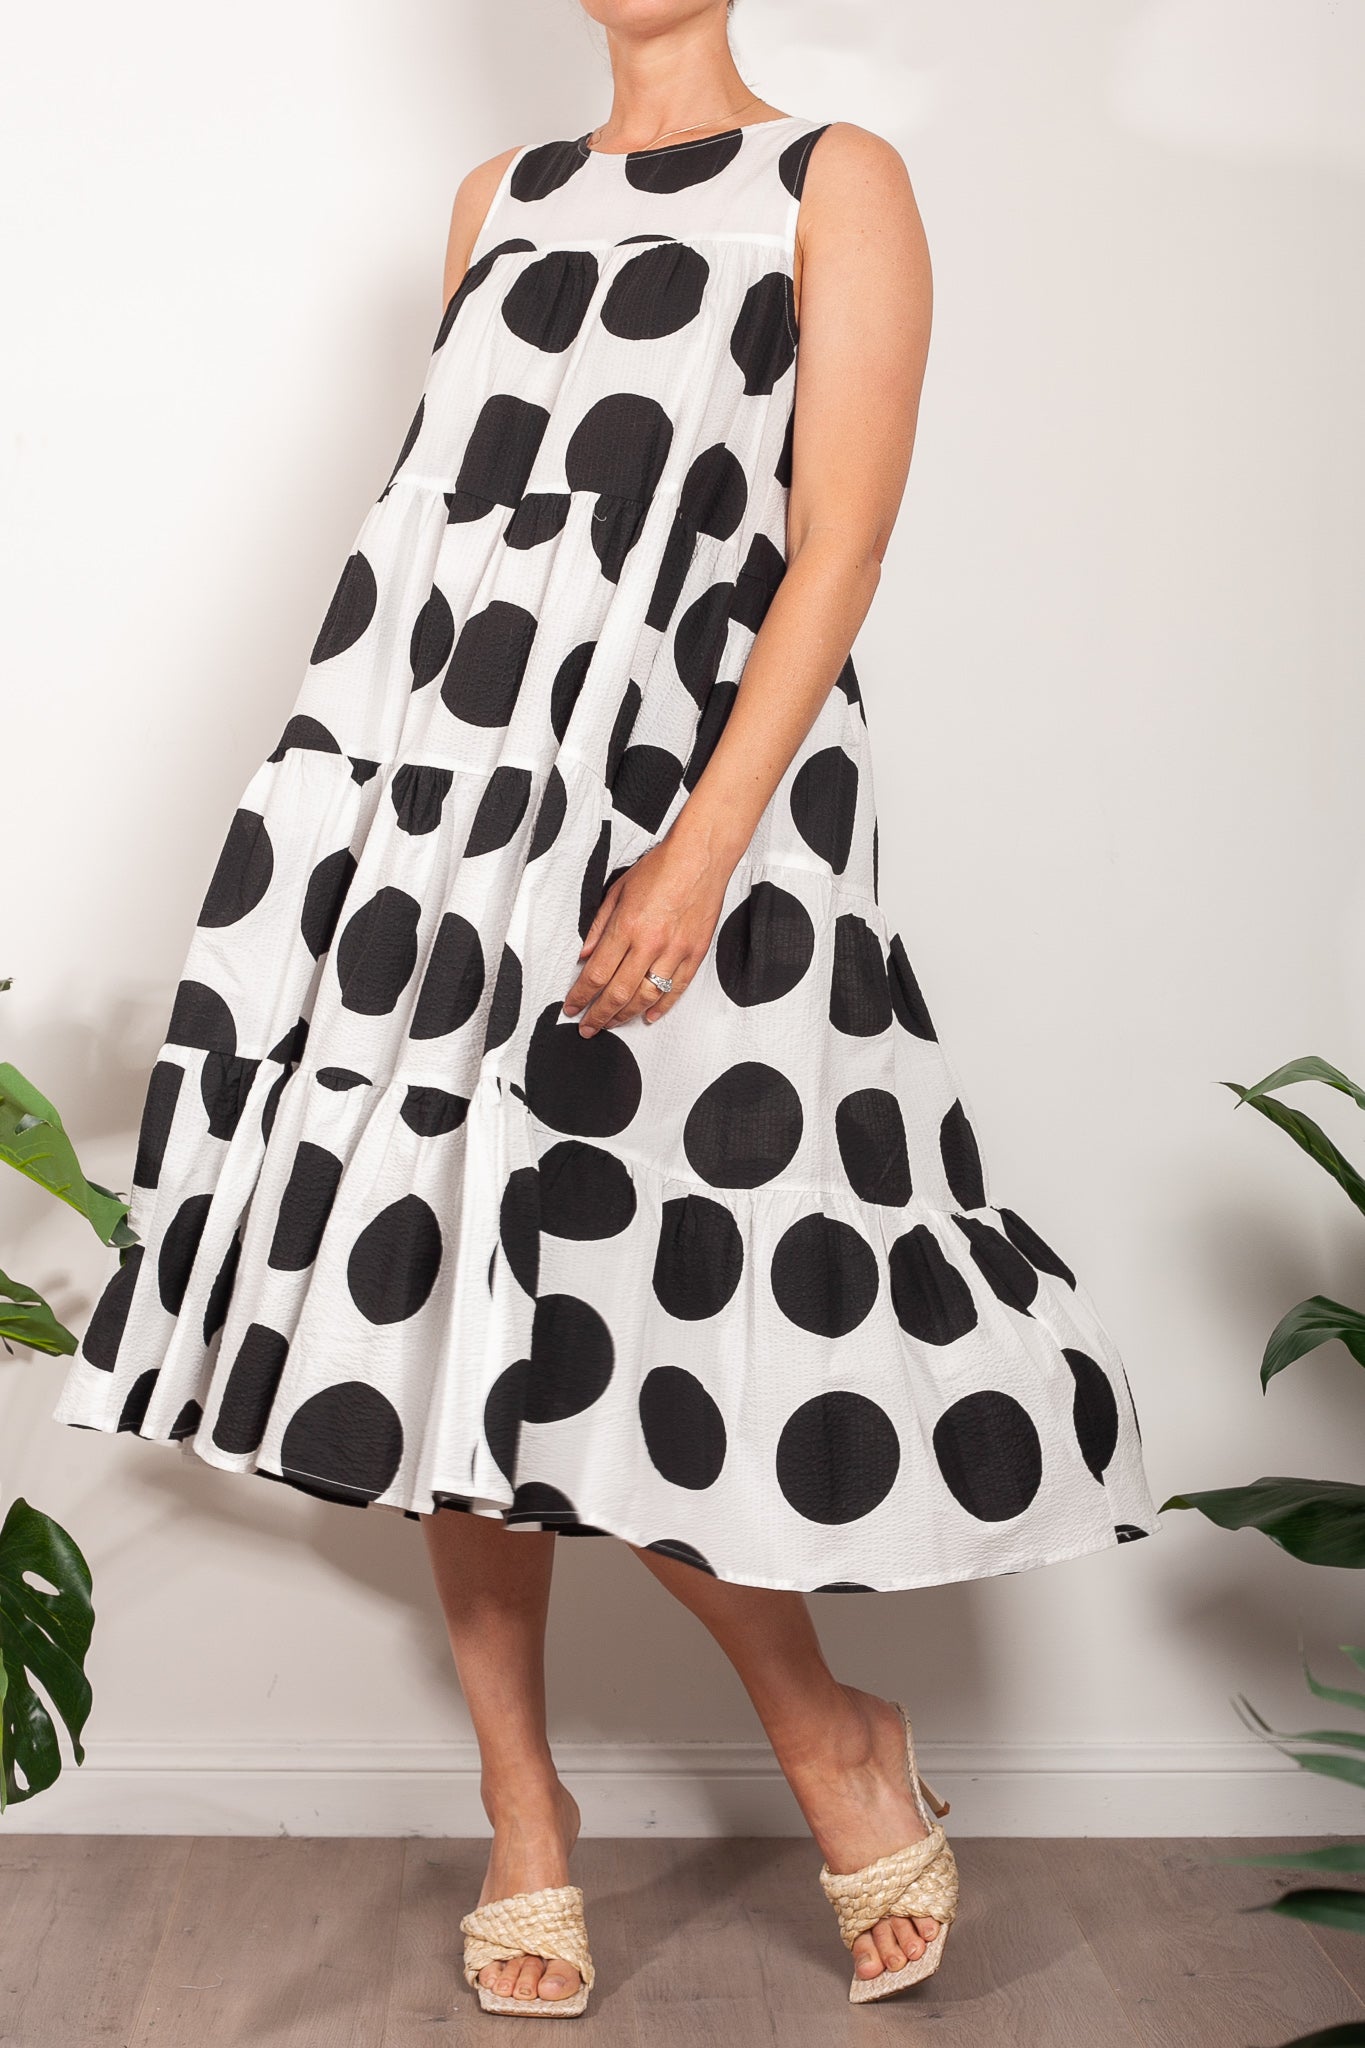 CURATE Trelise Cooper Don't Stop The Spot Dress